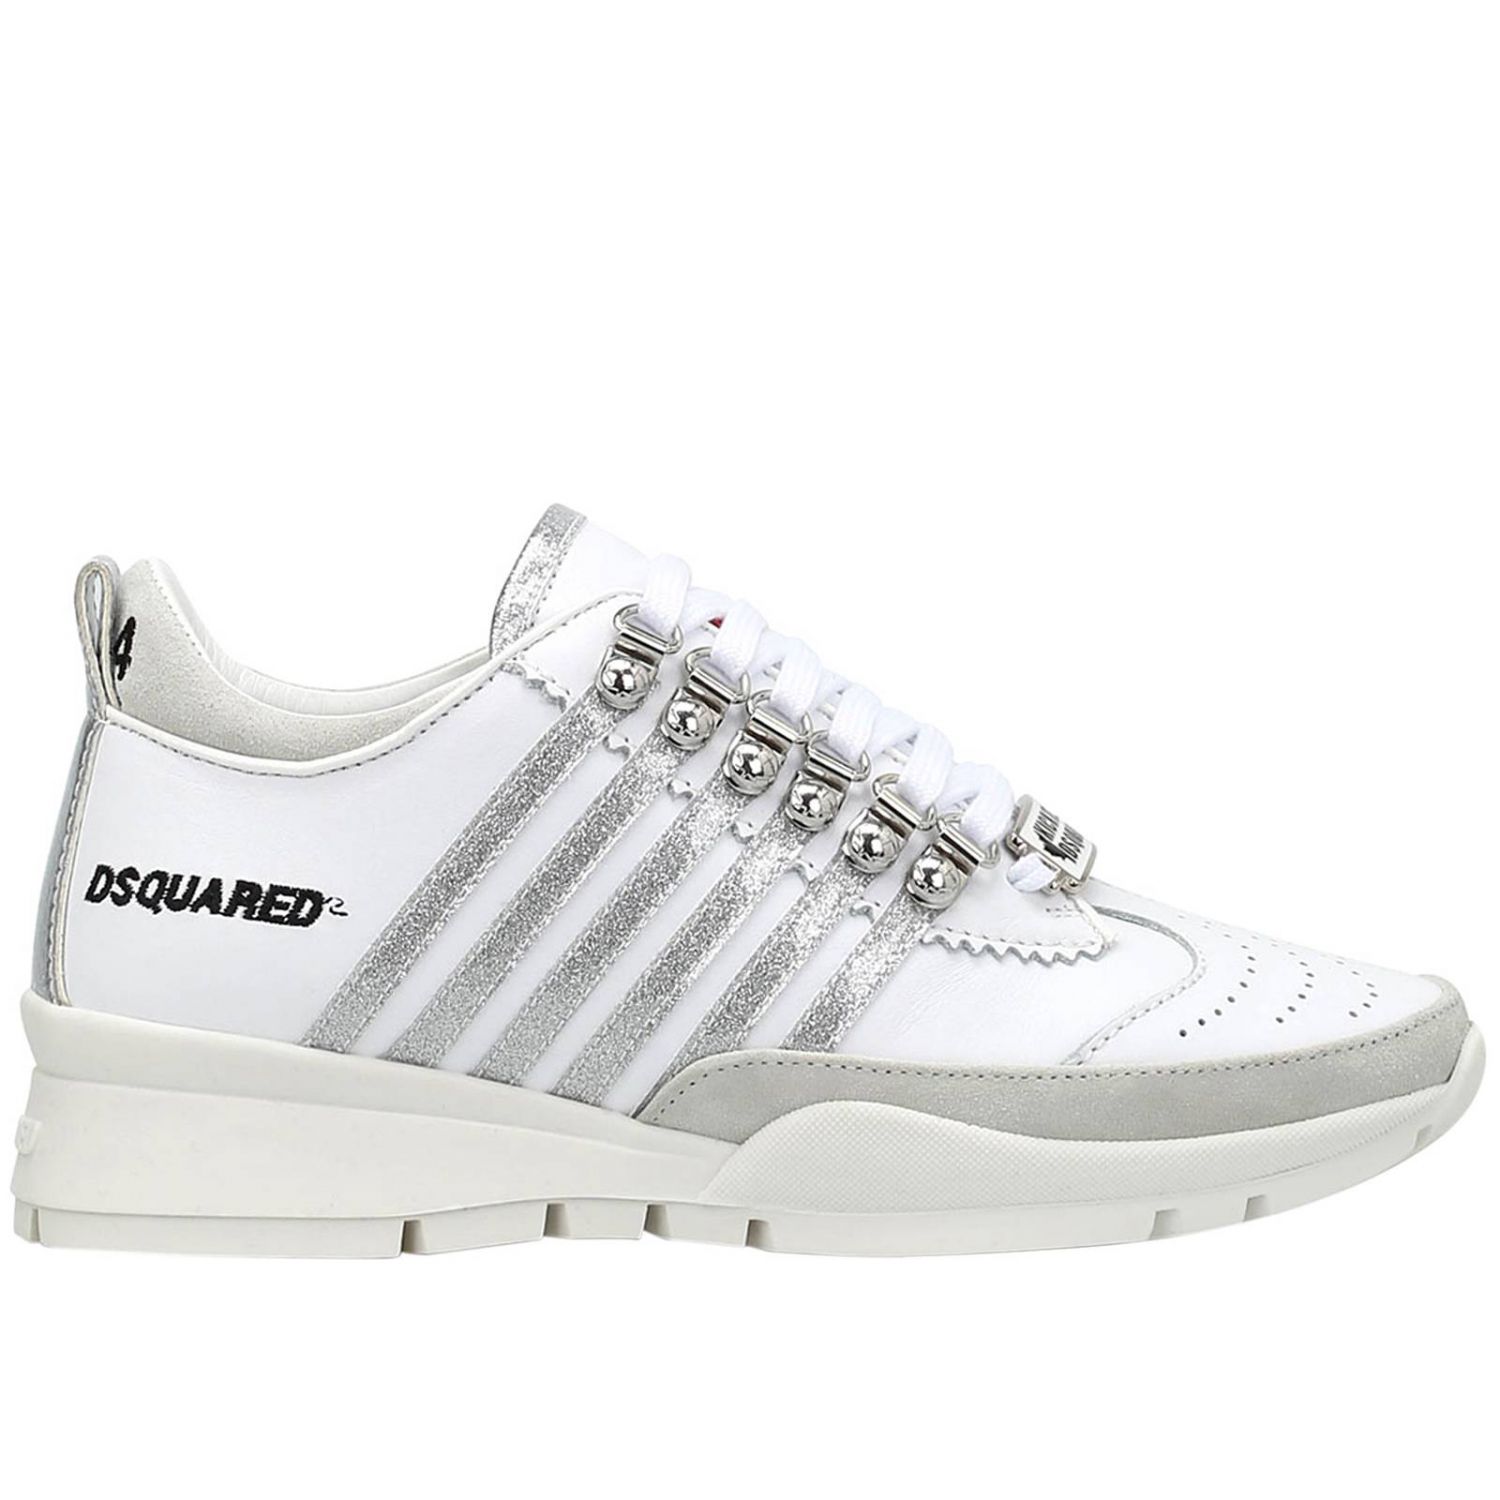 dsquared sneakers fit